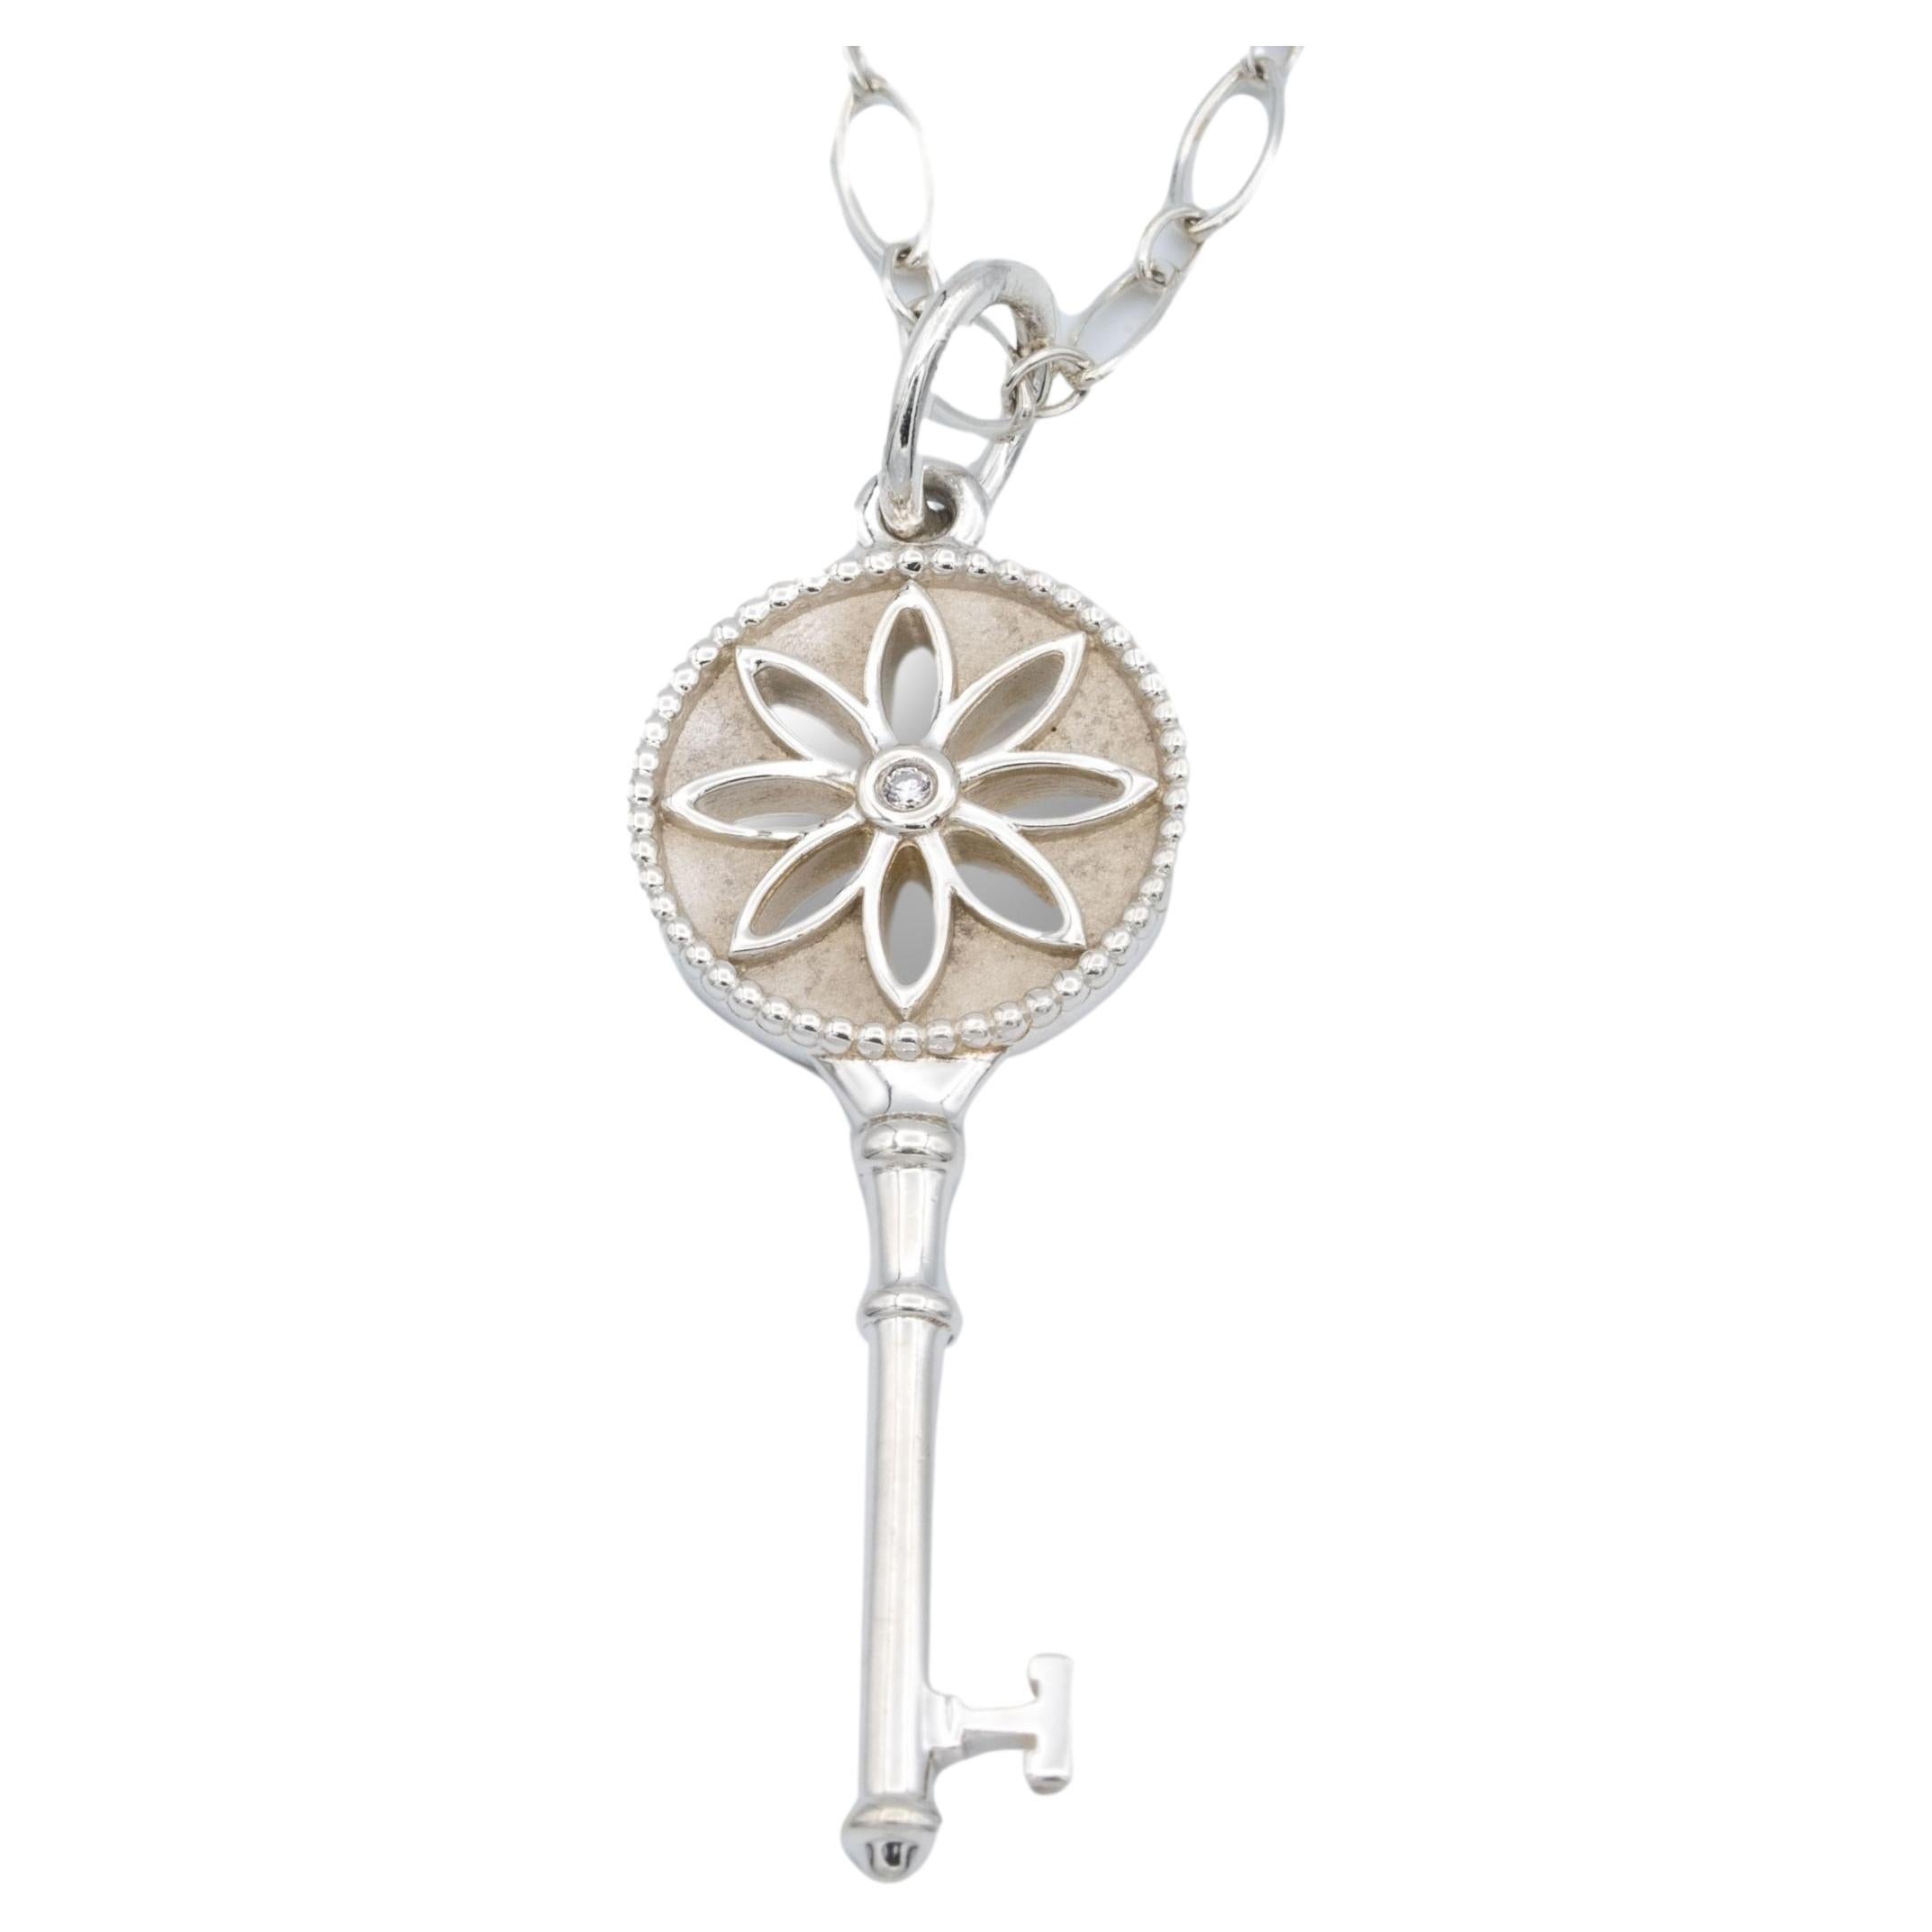 Tiffany & Co. Sterling Silver Daisy Key Pendant Necklace with Diamond